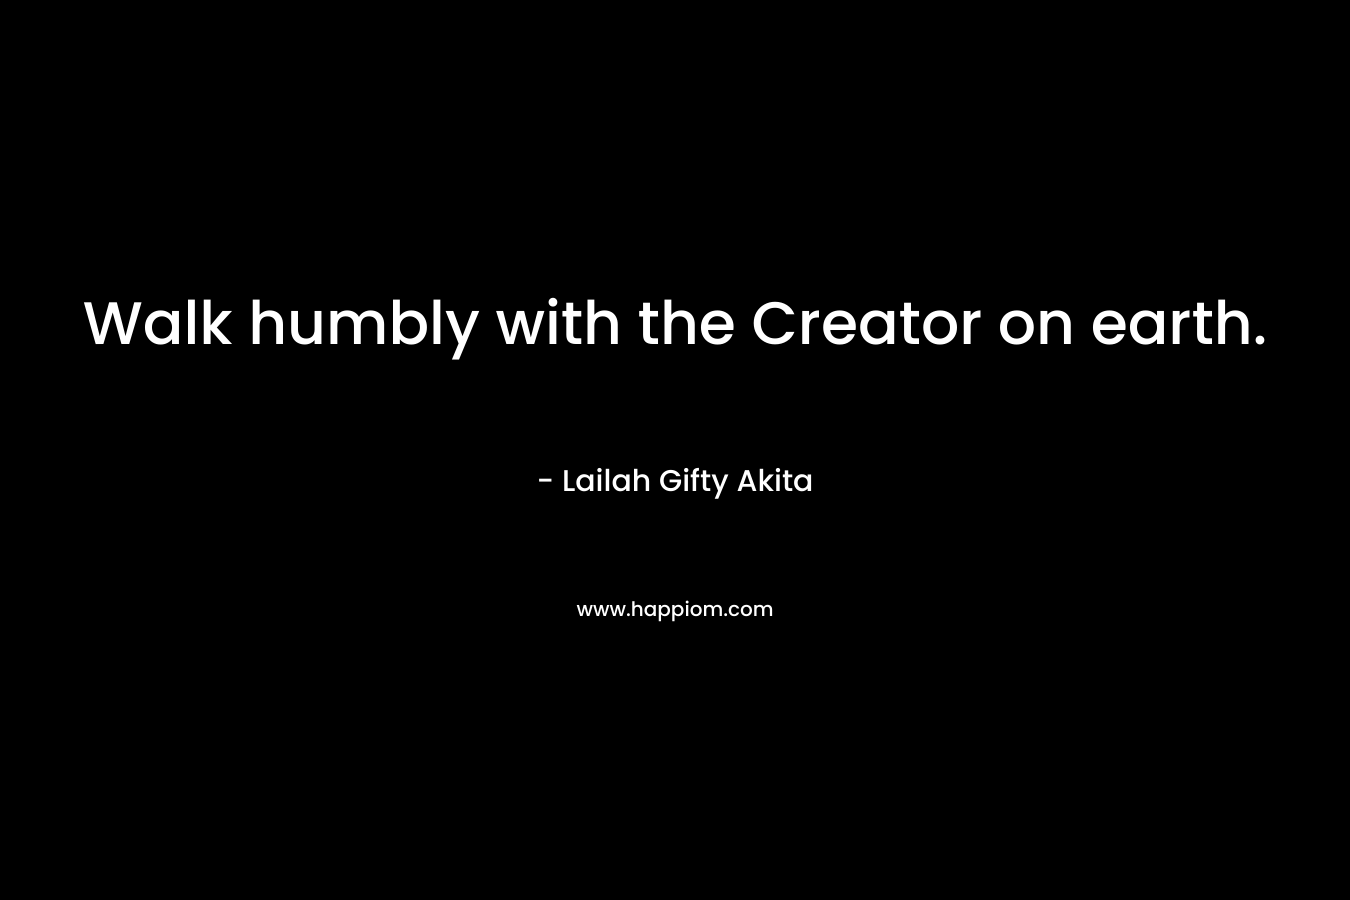 Walk humbly with the Creator on earth.